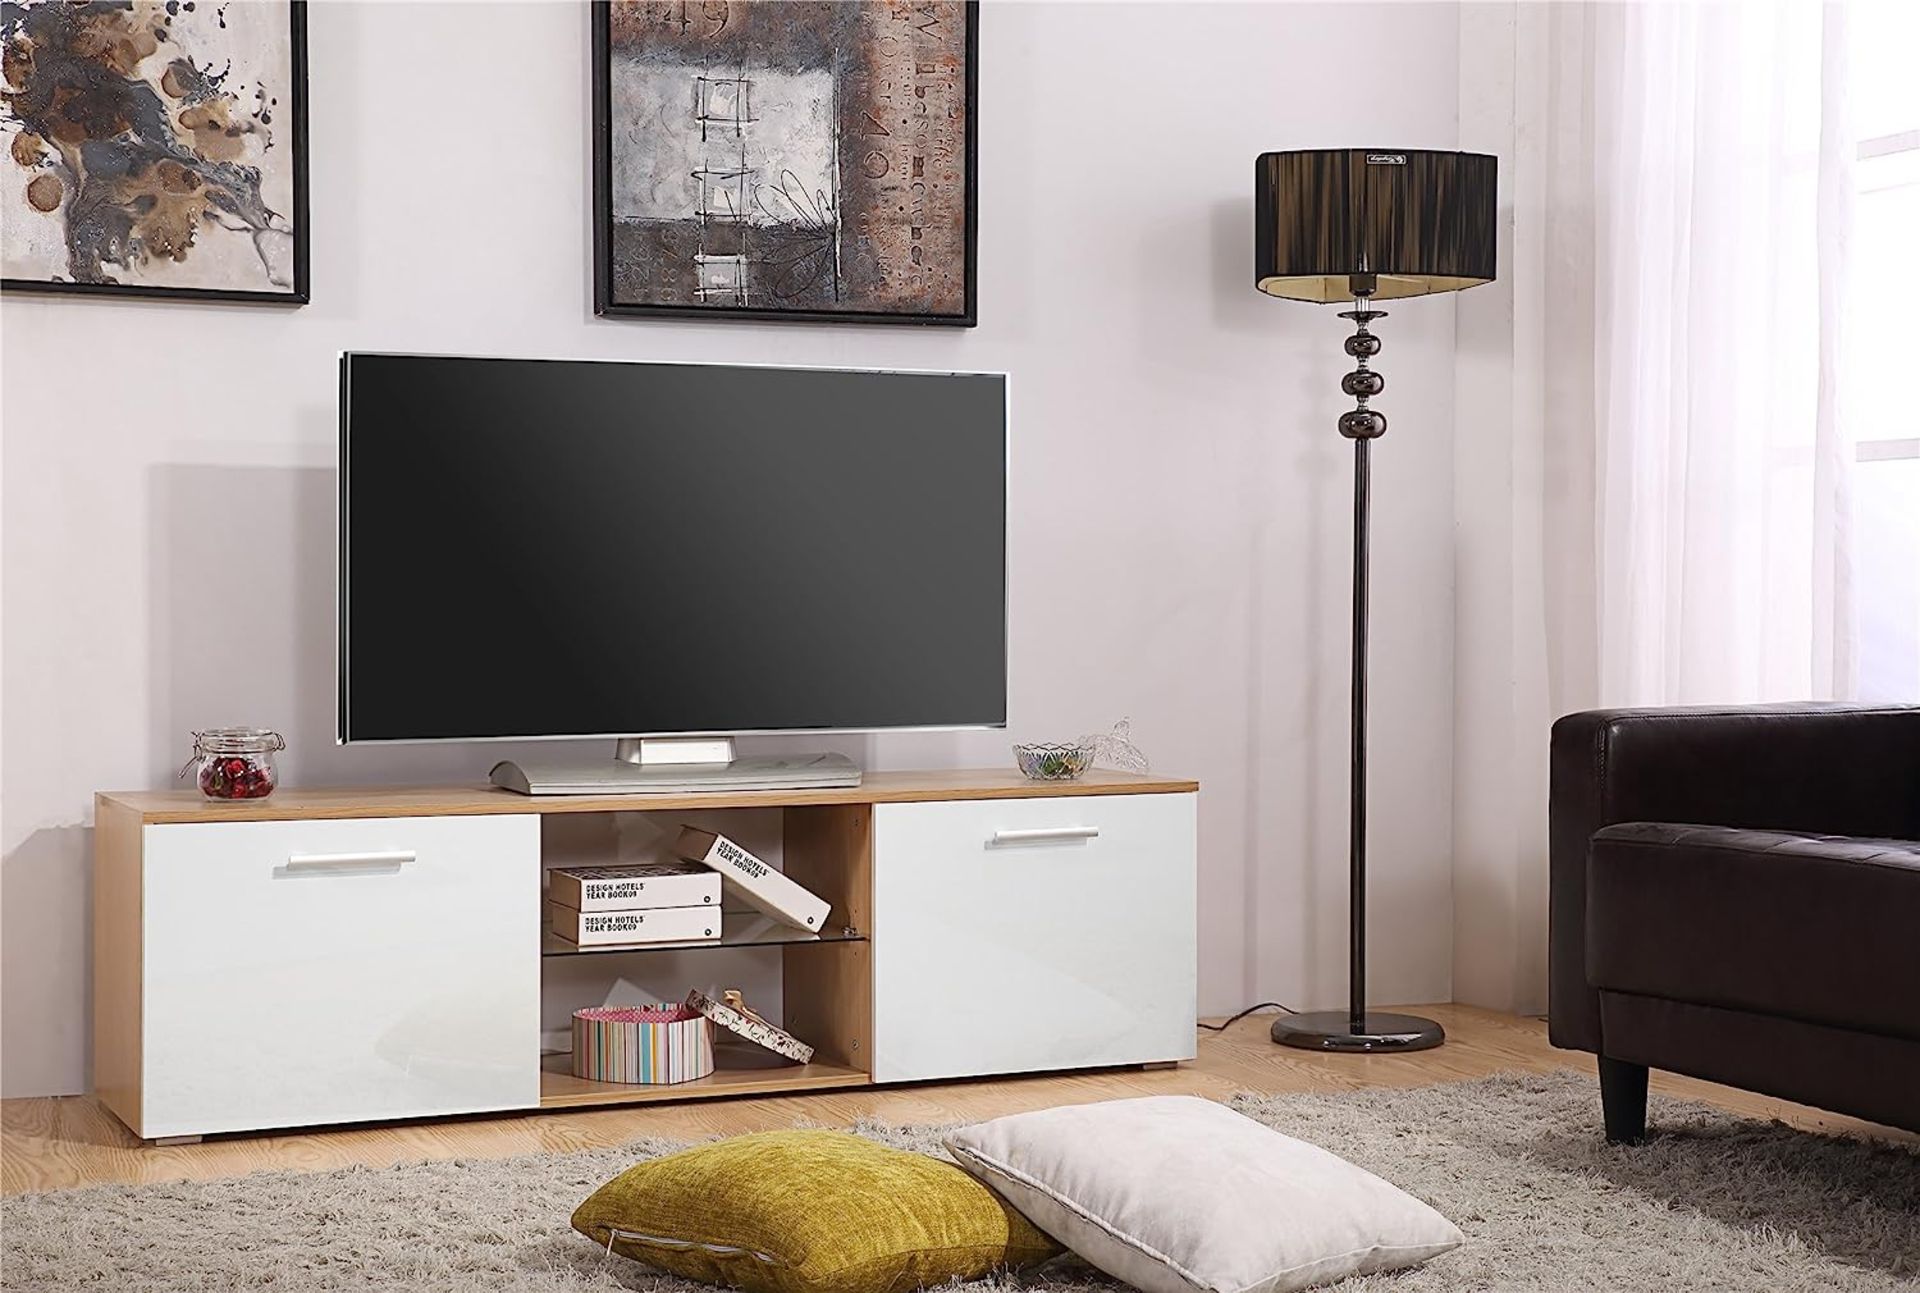 5 X BRAND NEW HARMIN MODERN 160CM TV STAND CABINET UNIT WITH HIGH GLOSS DOORS (WHITE ON OAK) - Image 2 of 9